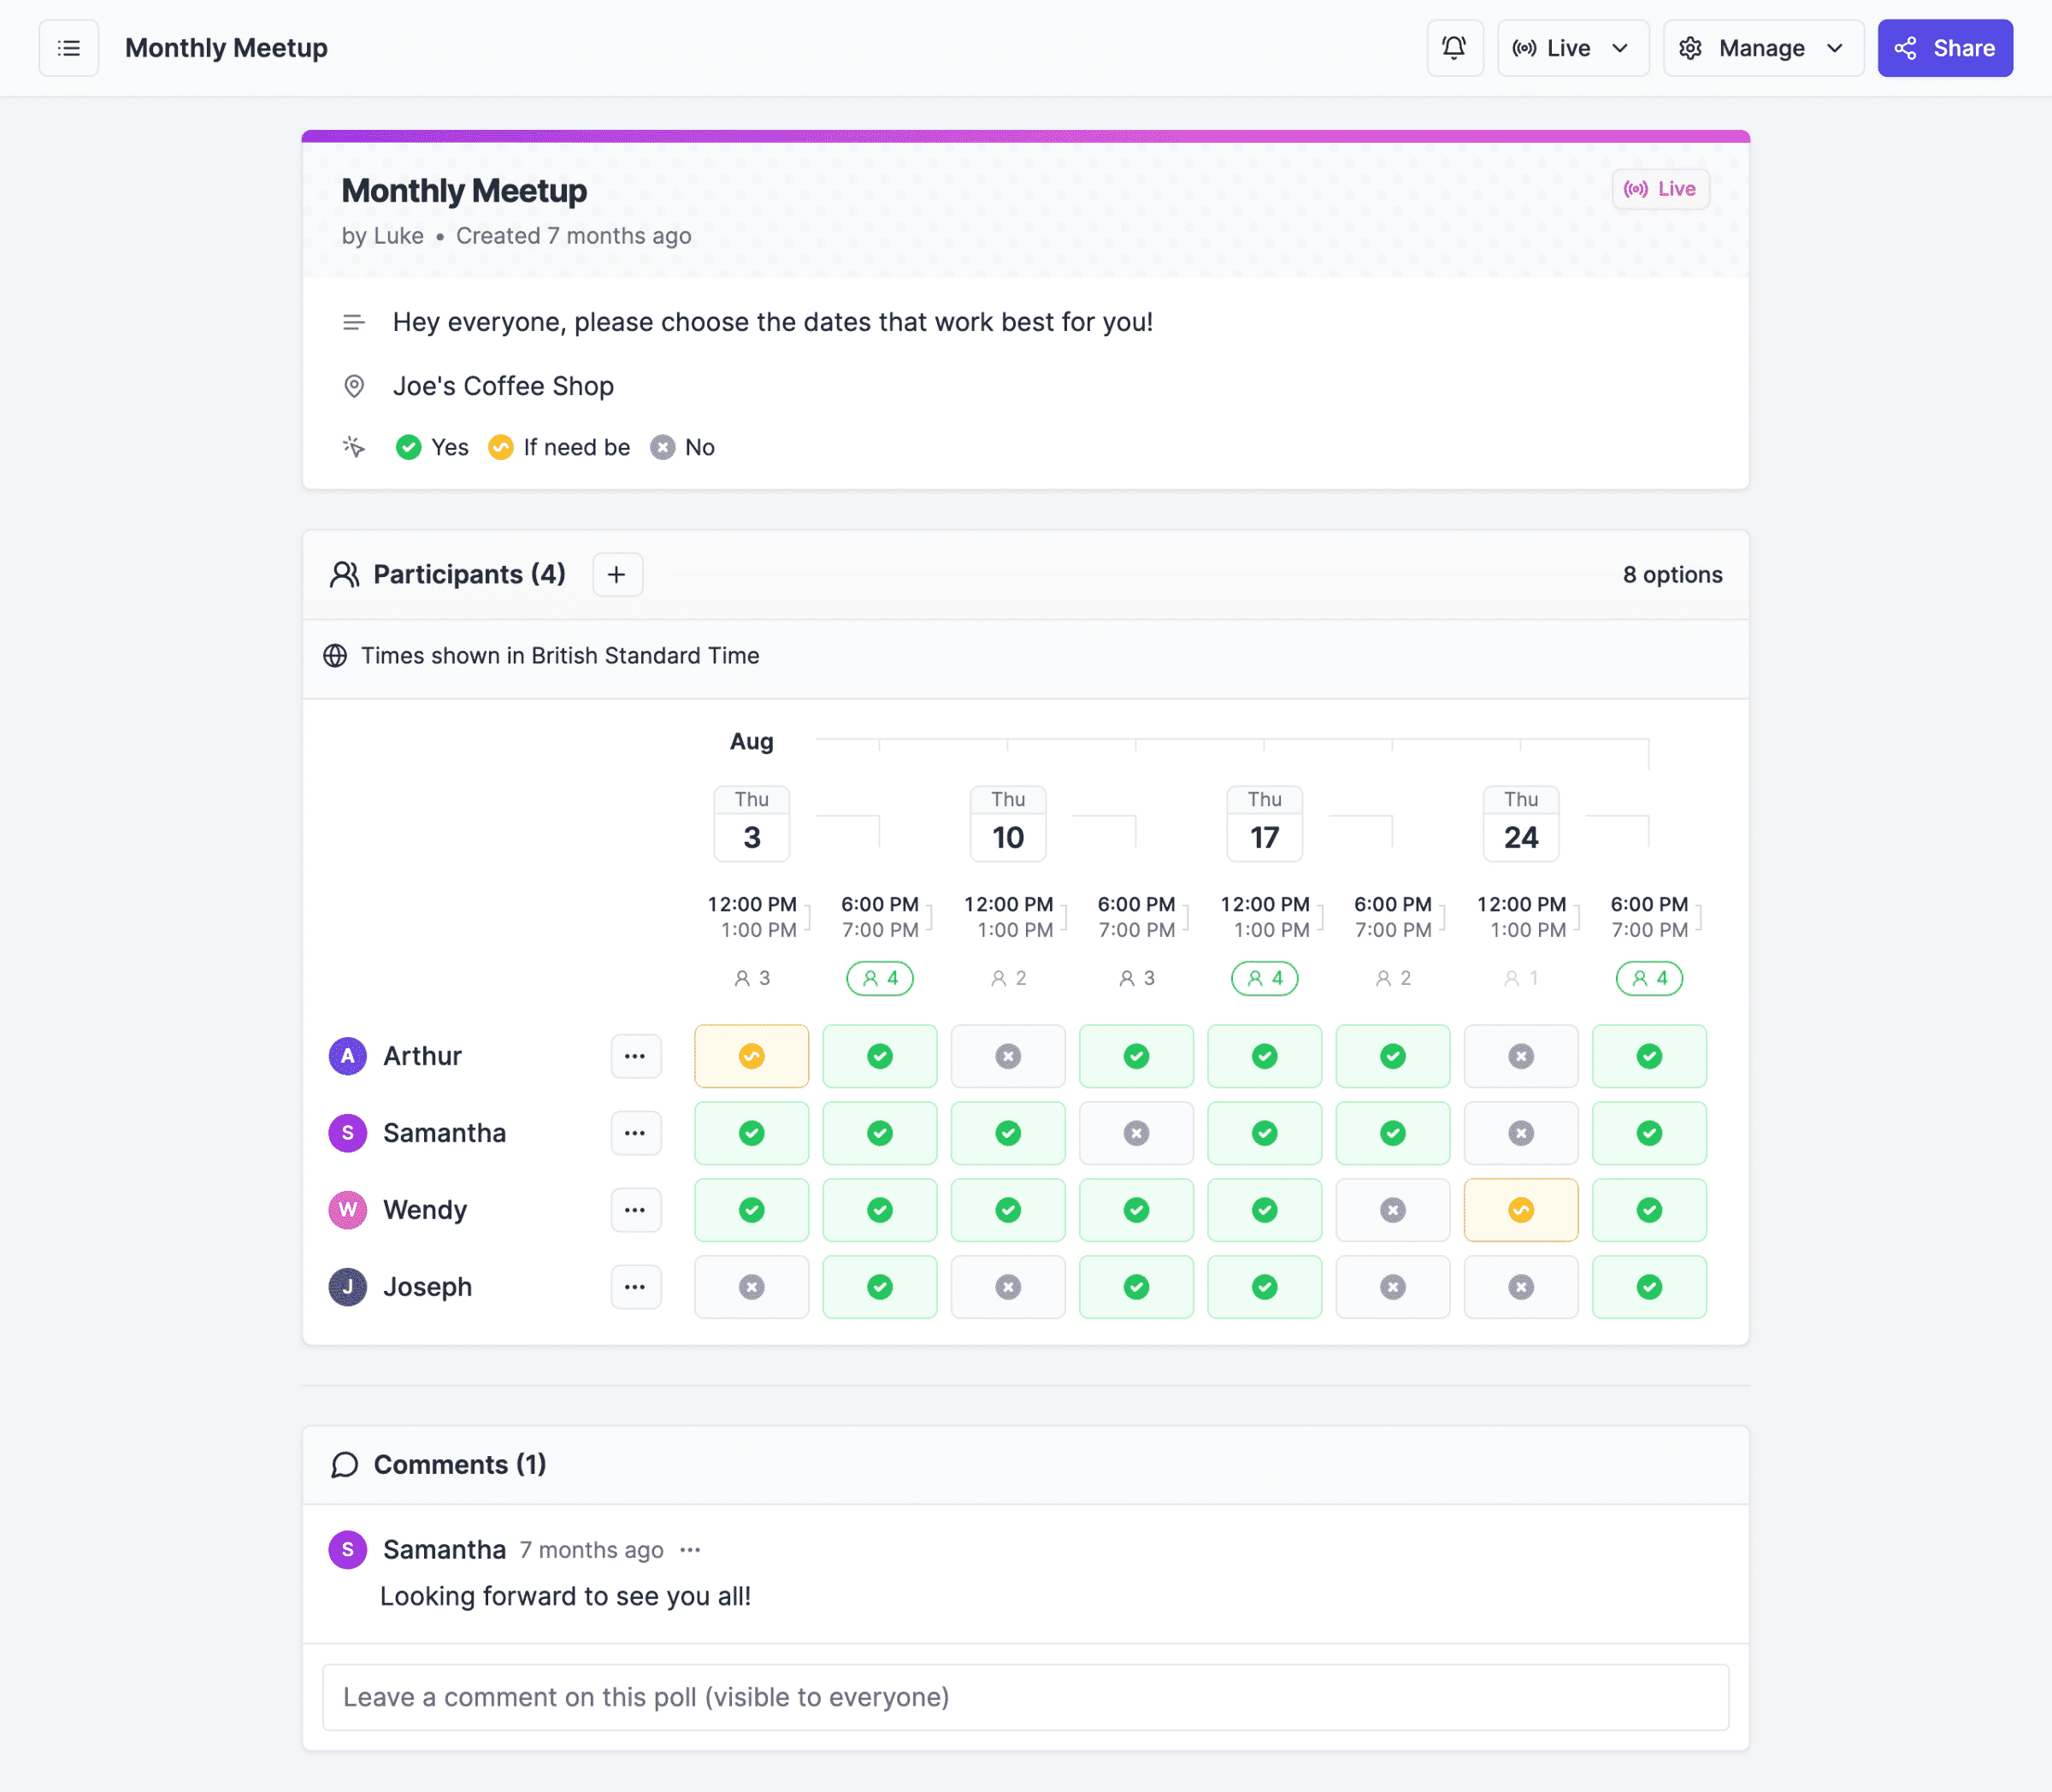 Rallly - Best for Scheduling Meetings by Creating Polls/Votes